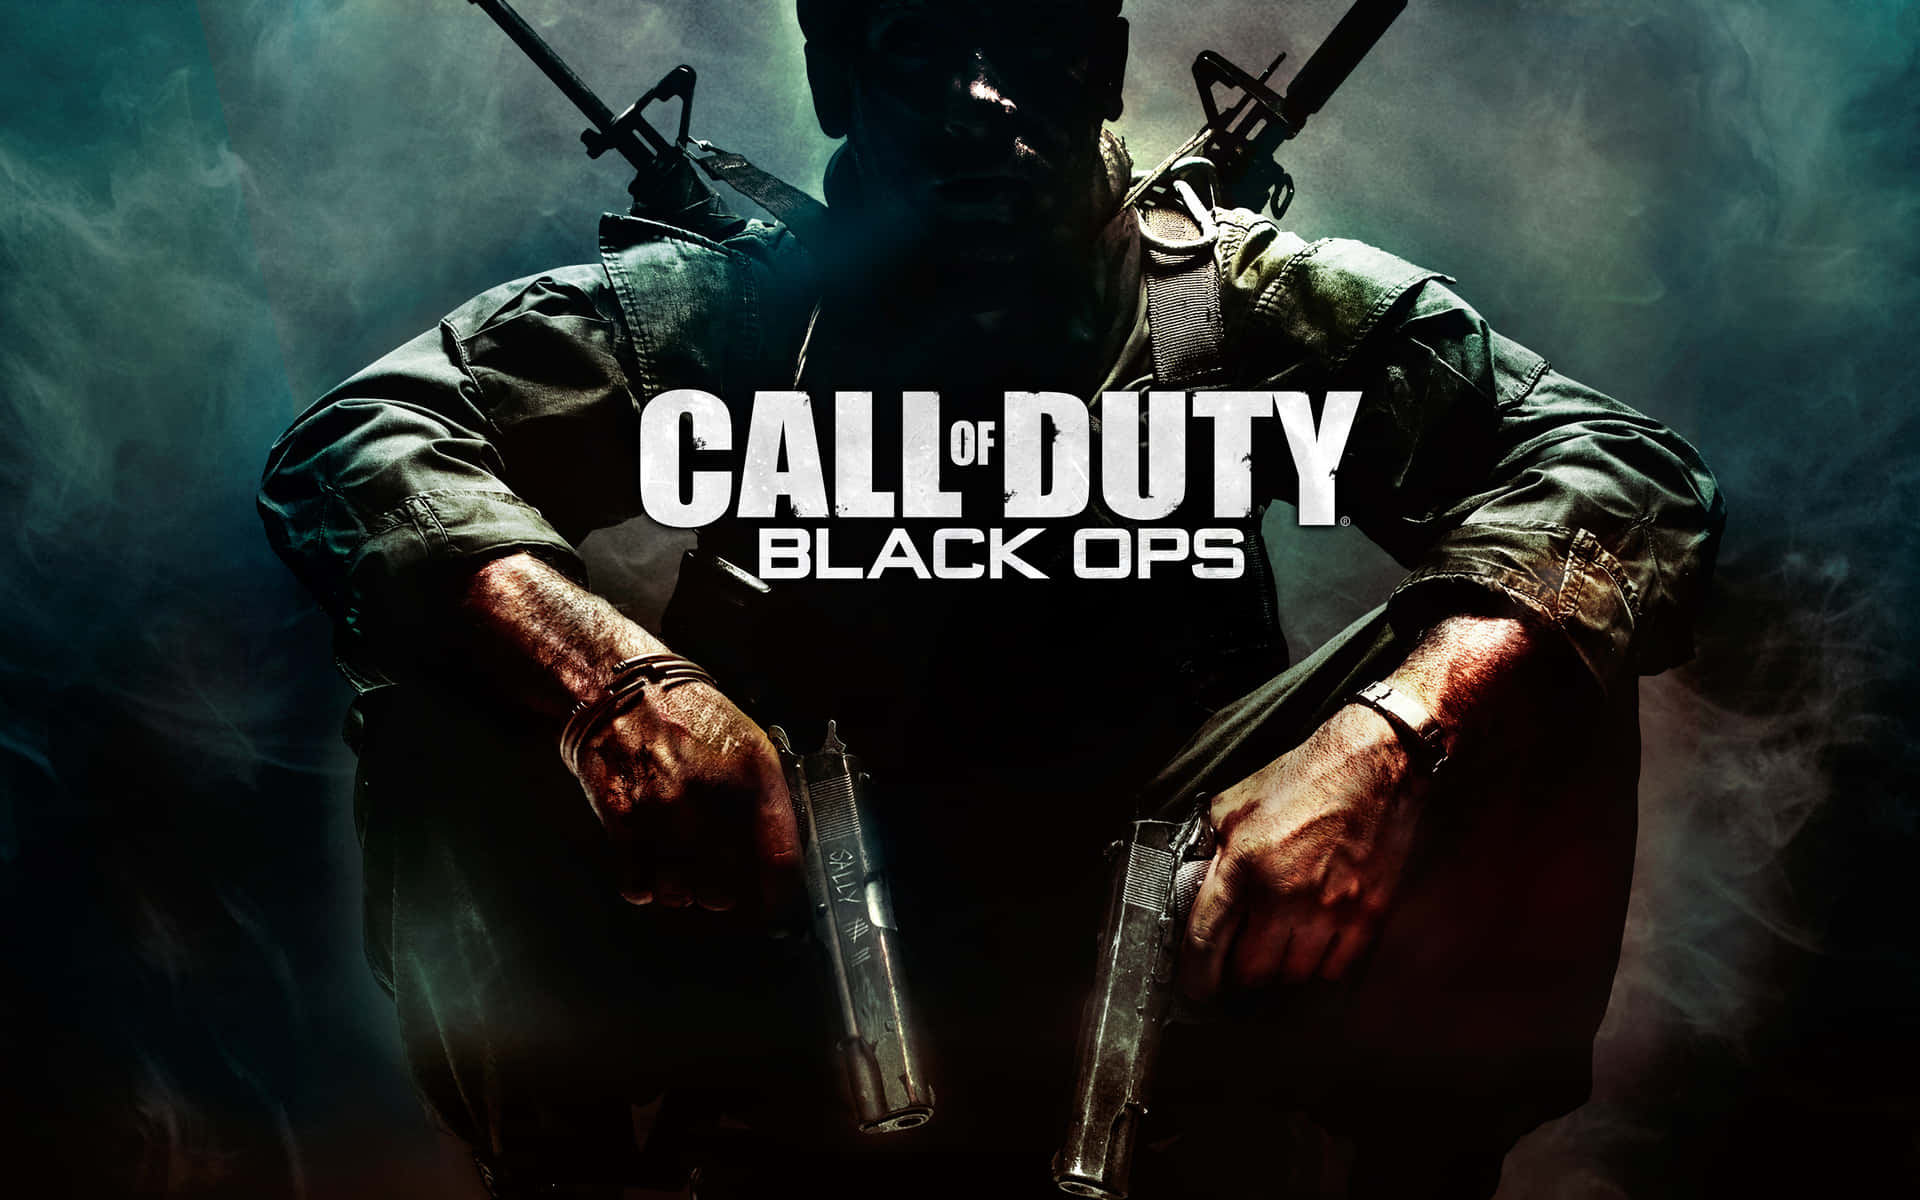 Call of Duty Black Ops franchise is all set to expand